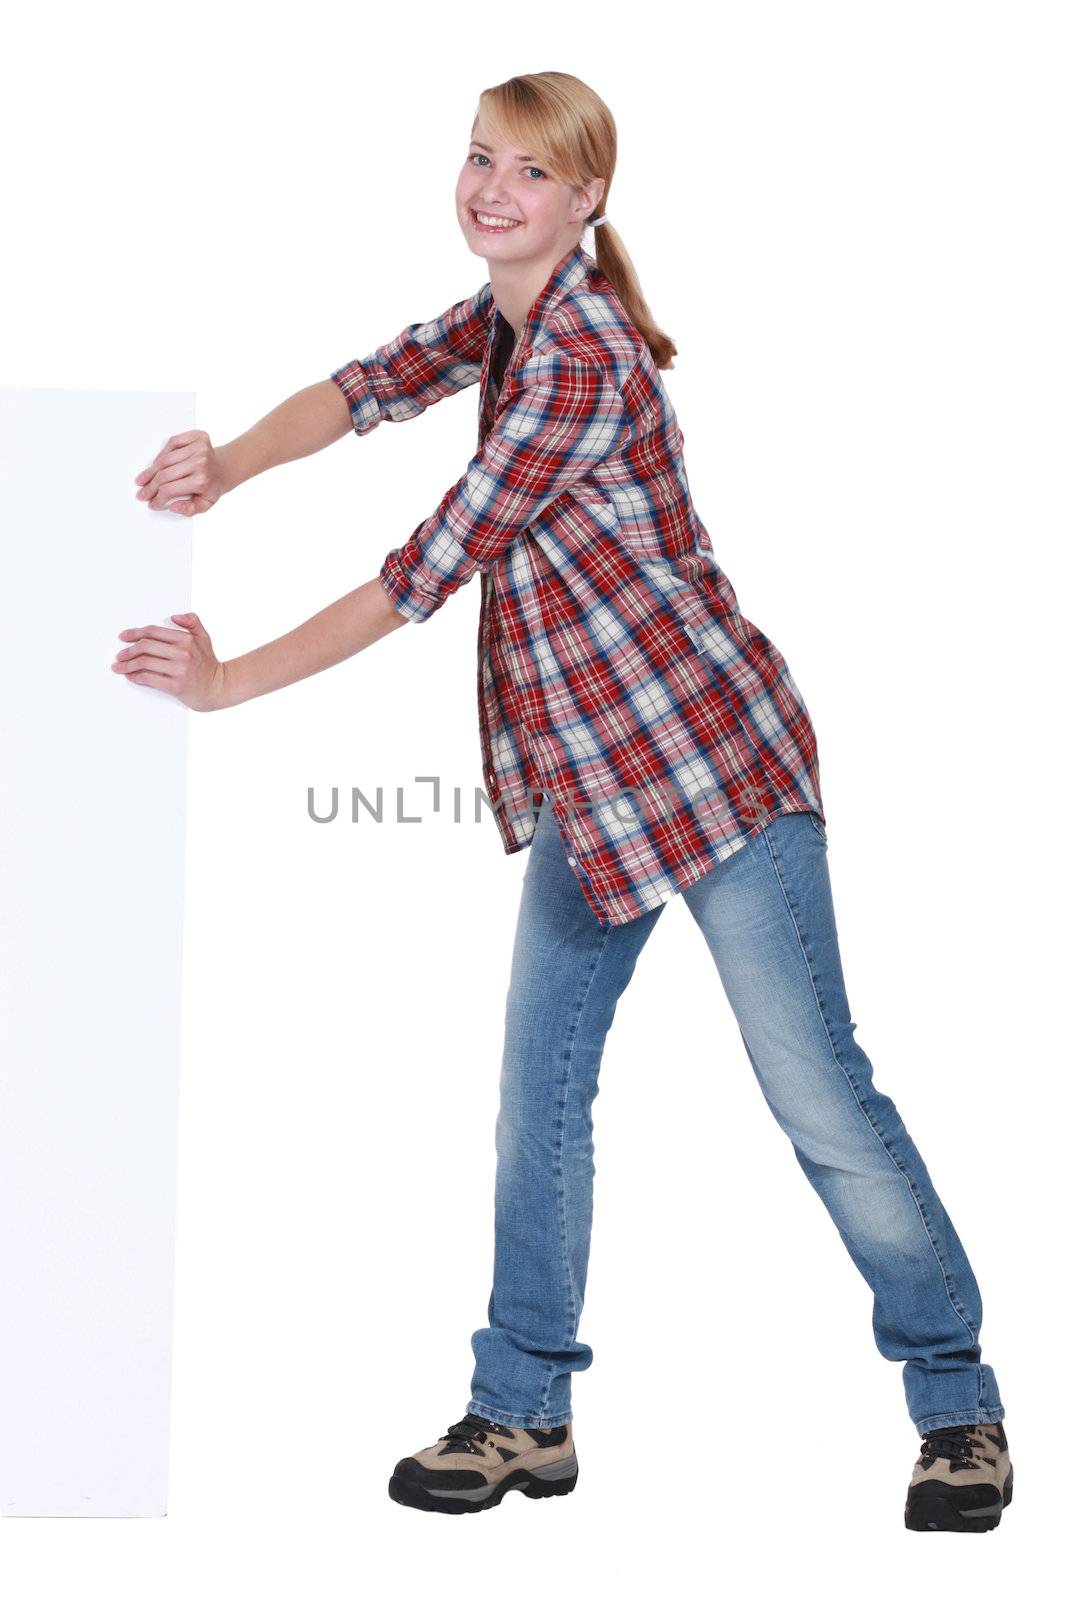 Woman pushing against blank poster by phovoir